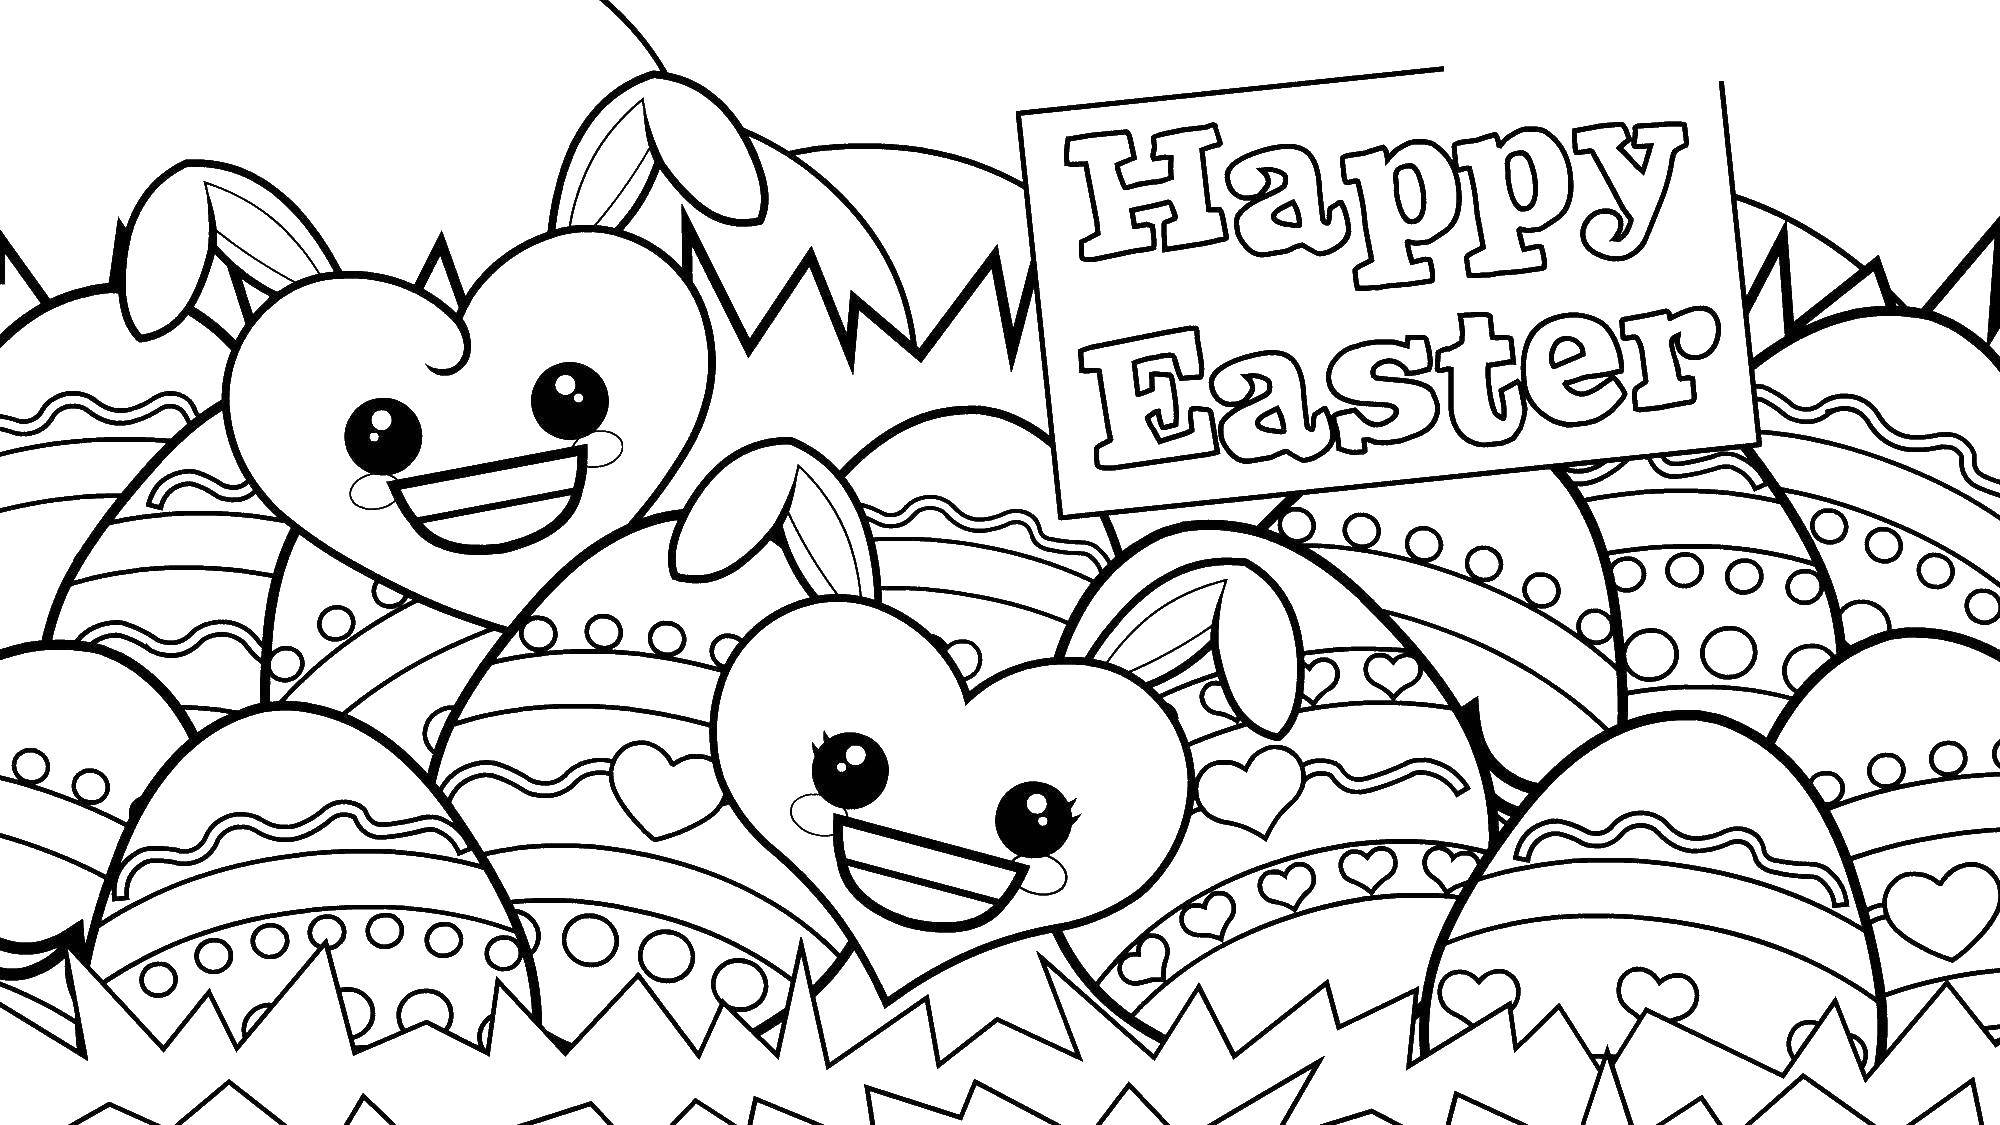 Coloring Easter eggs. Category coloring Easter. Tags:  Easter, eggs, rabbit.